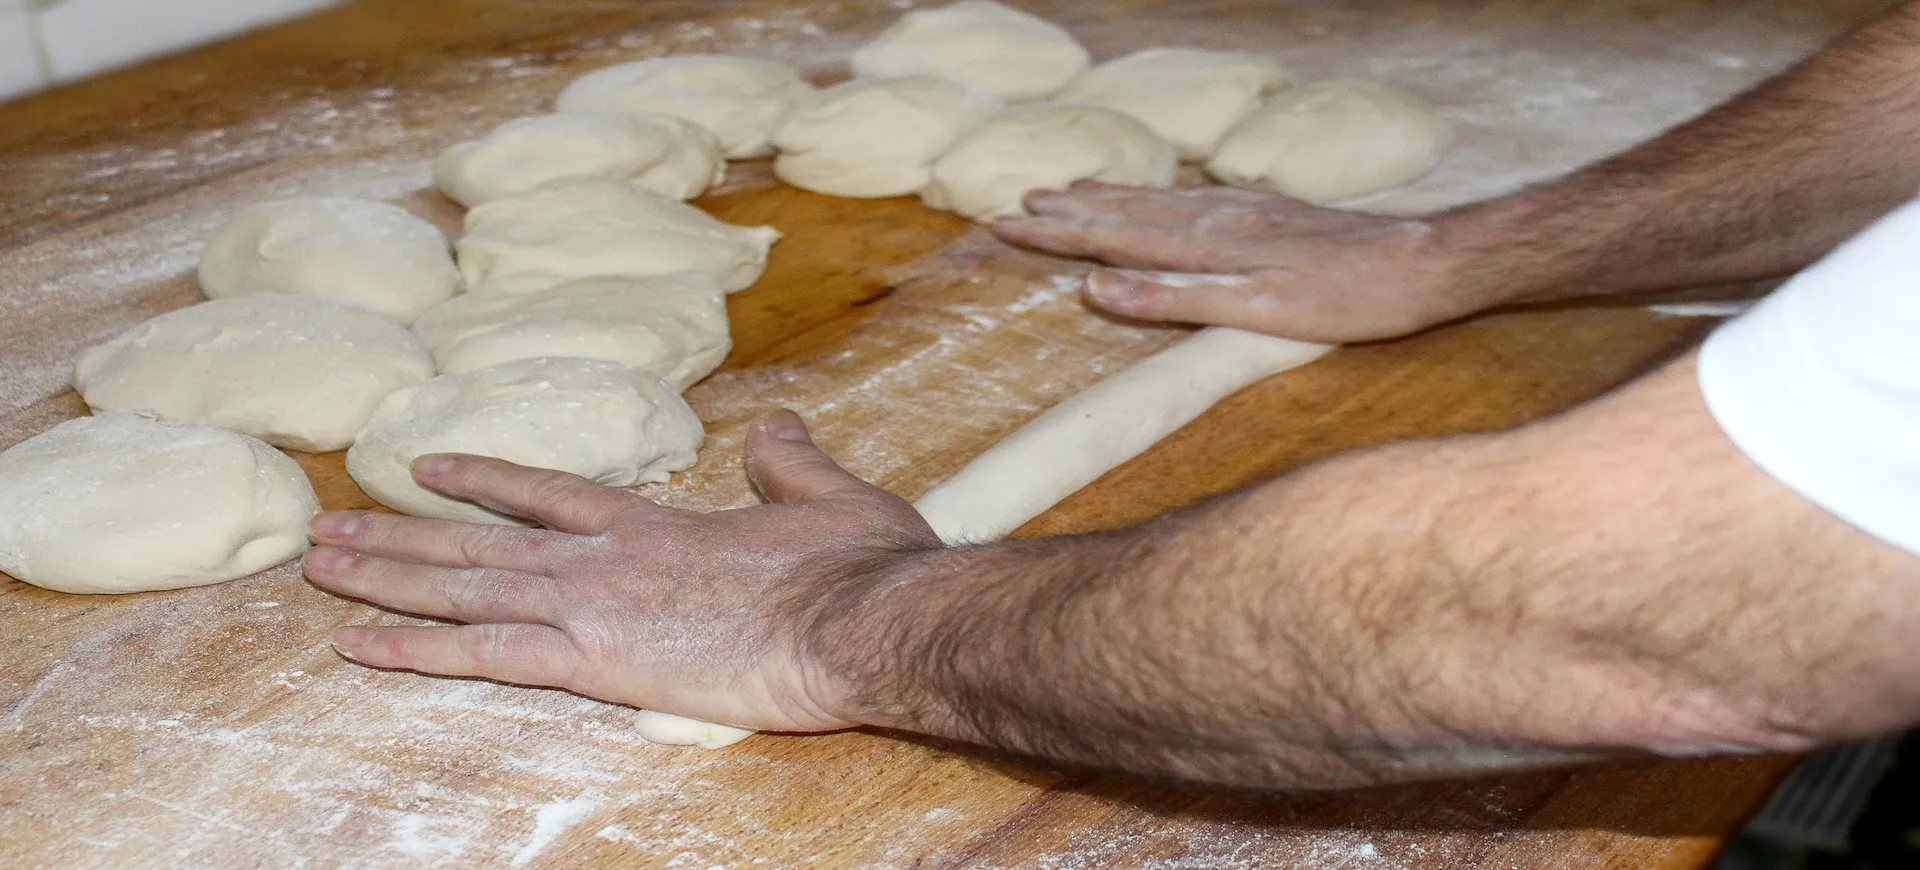 Artisan baker kneading and shaping a loaf of bread